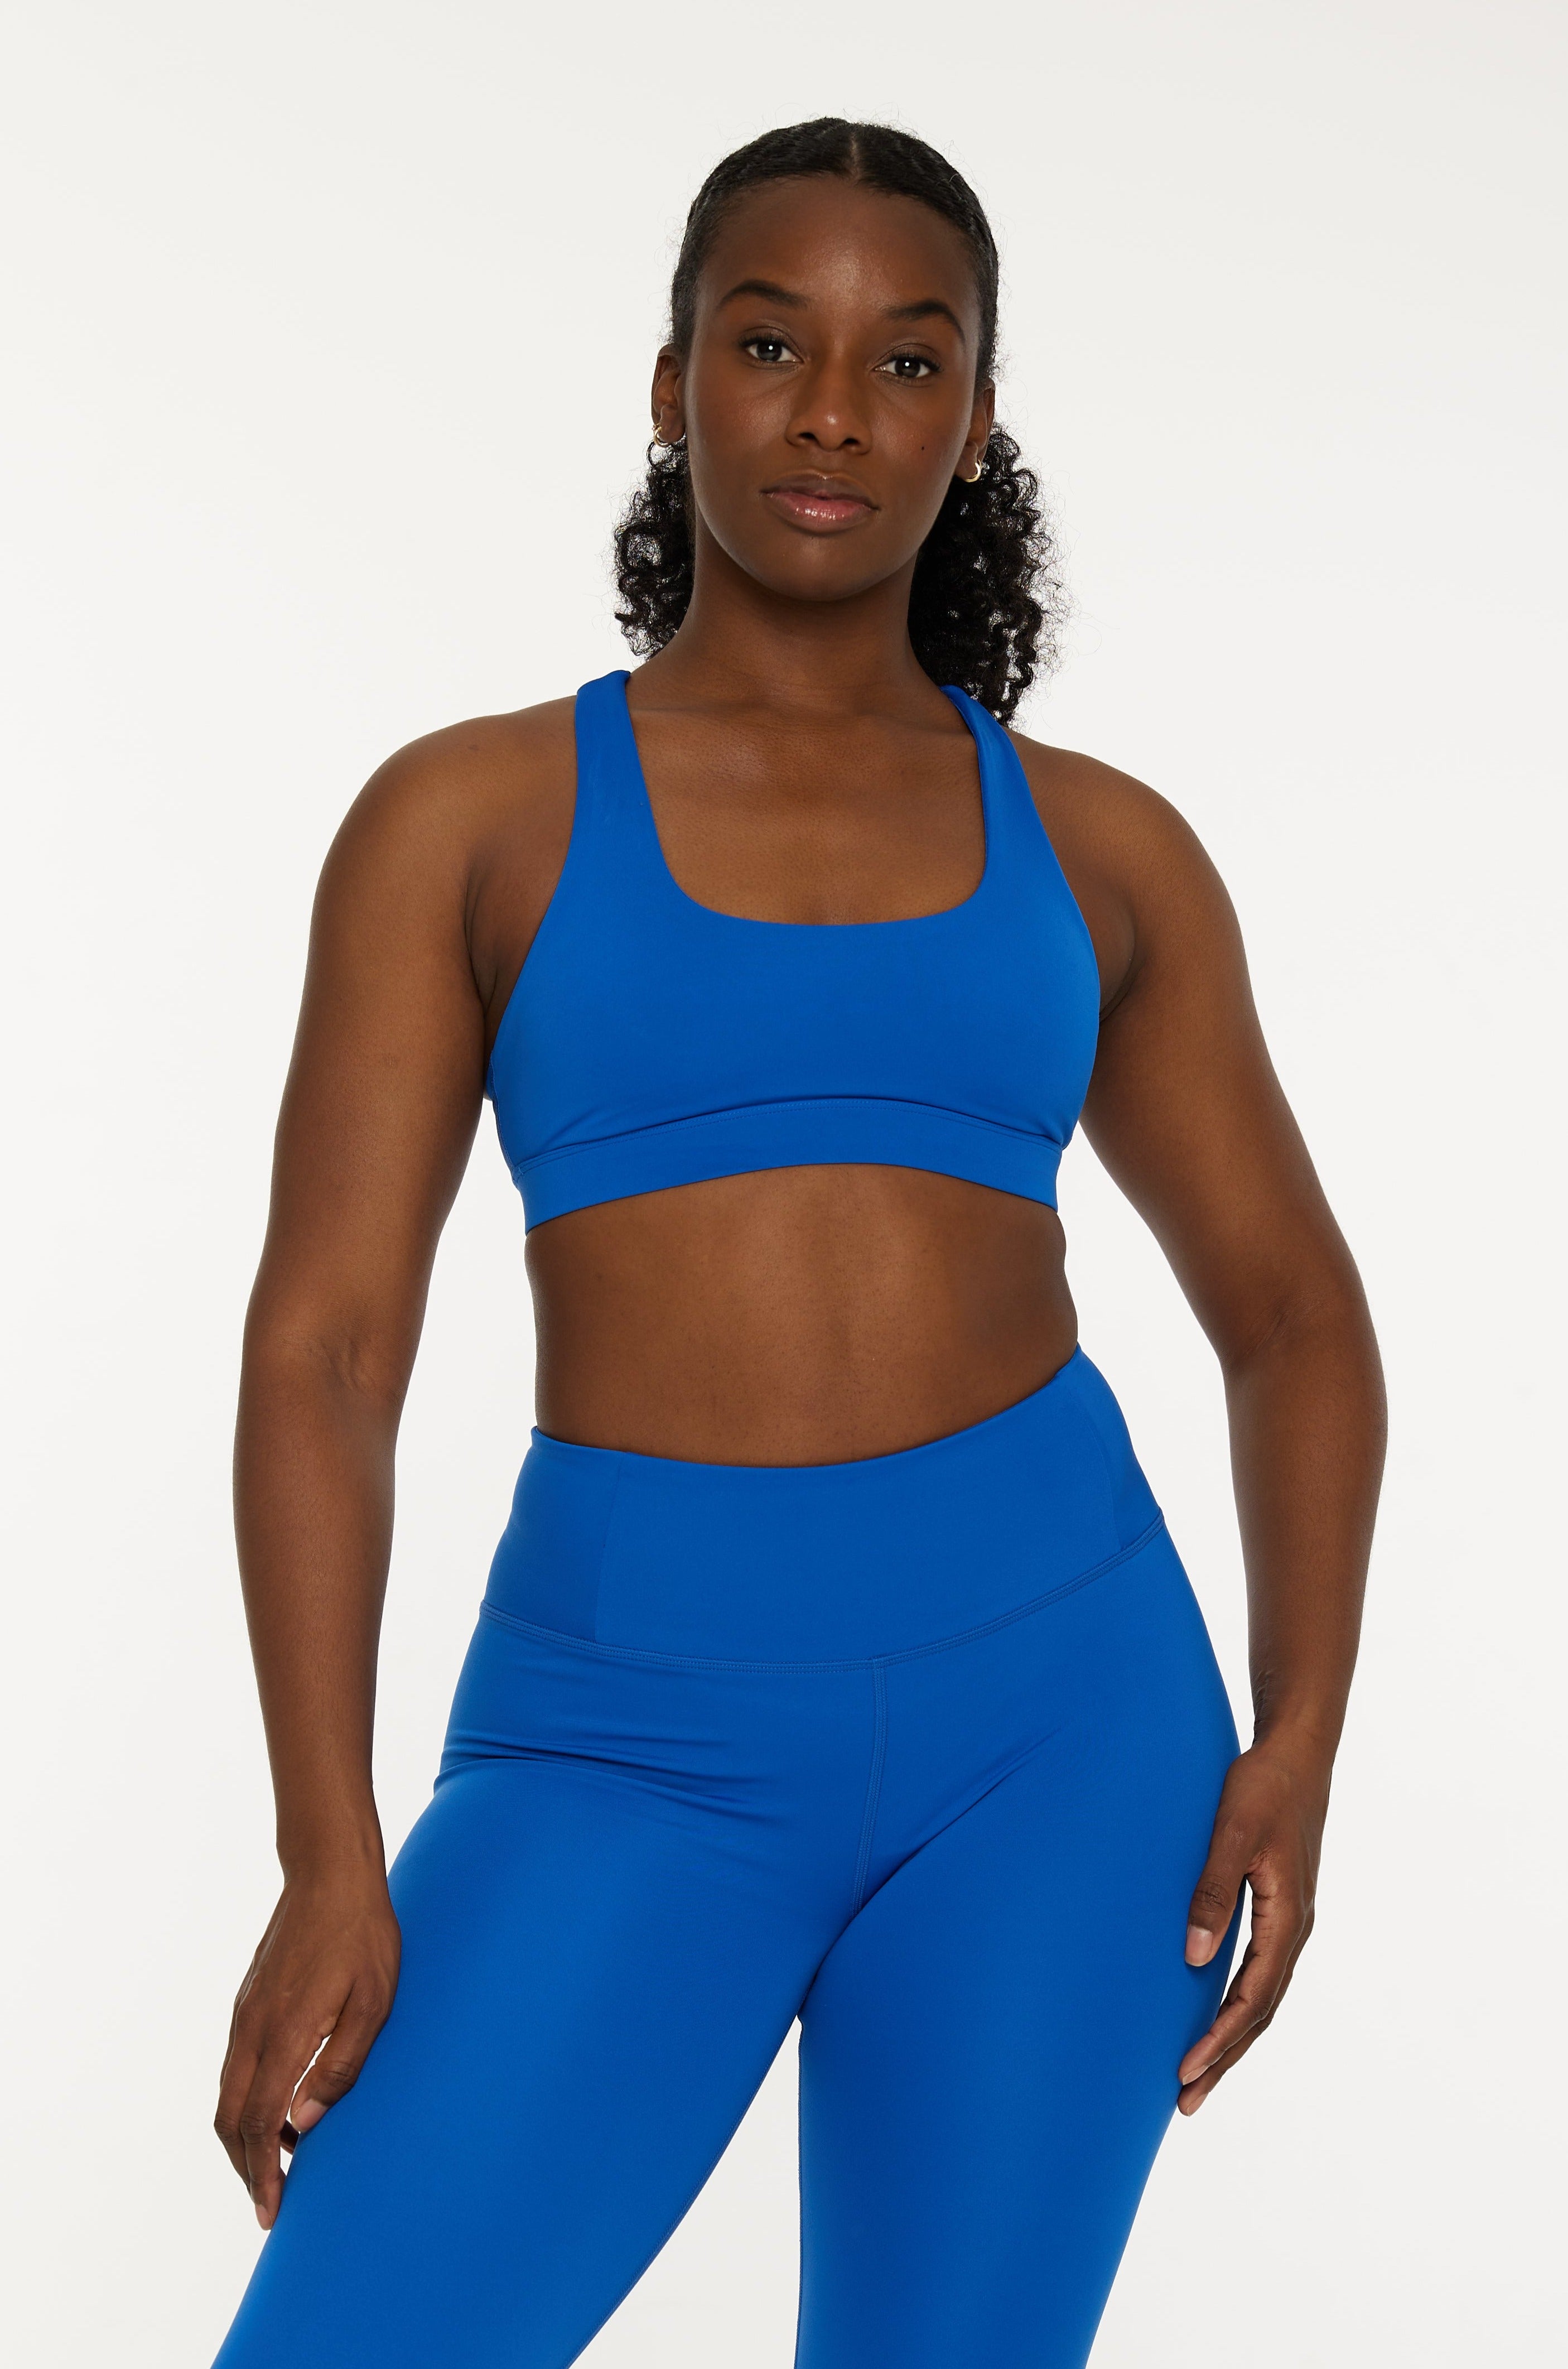 Blue Luxe Sport Leggings by Girlfriend Collective on Sale